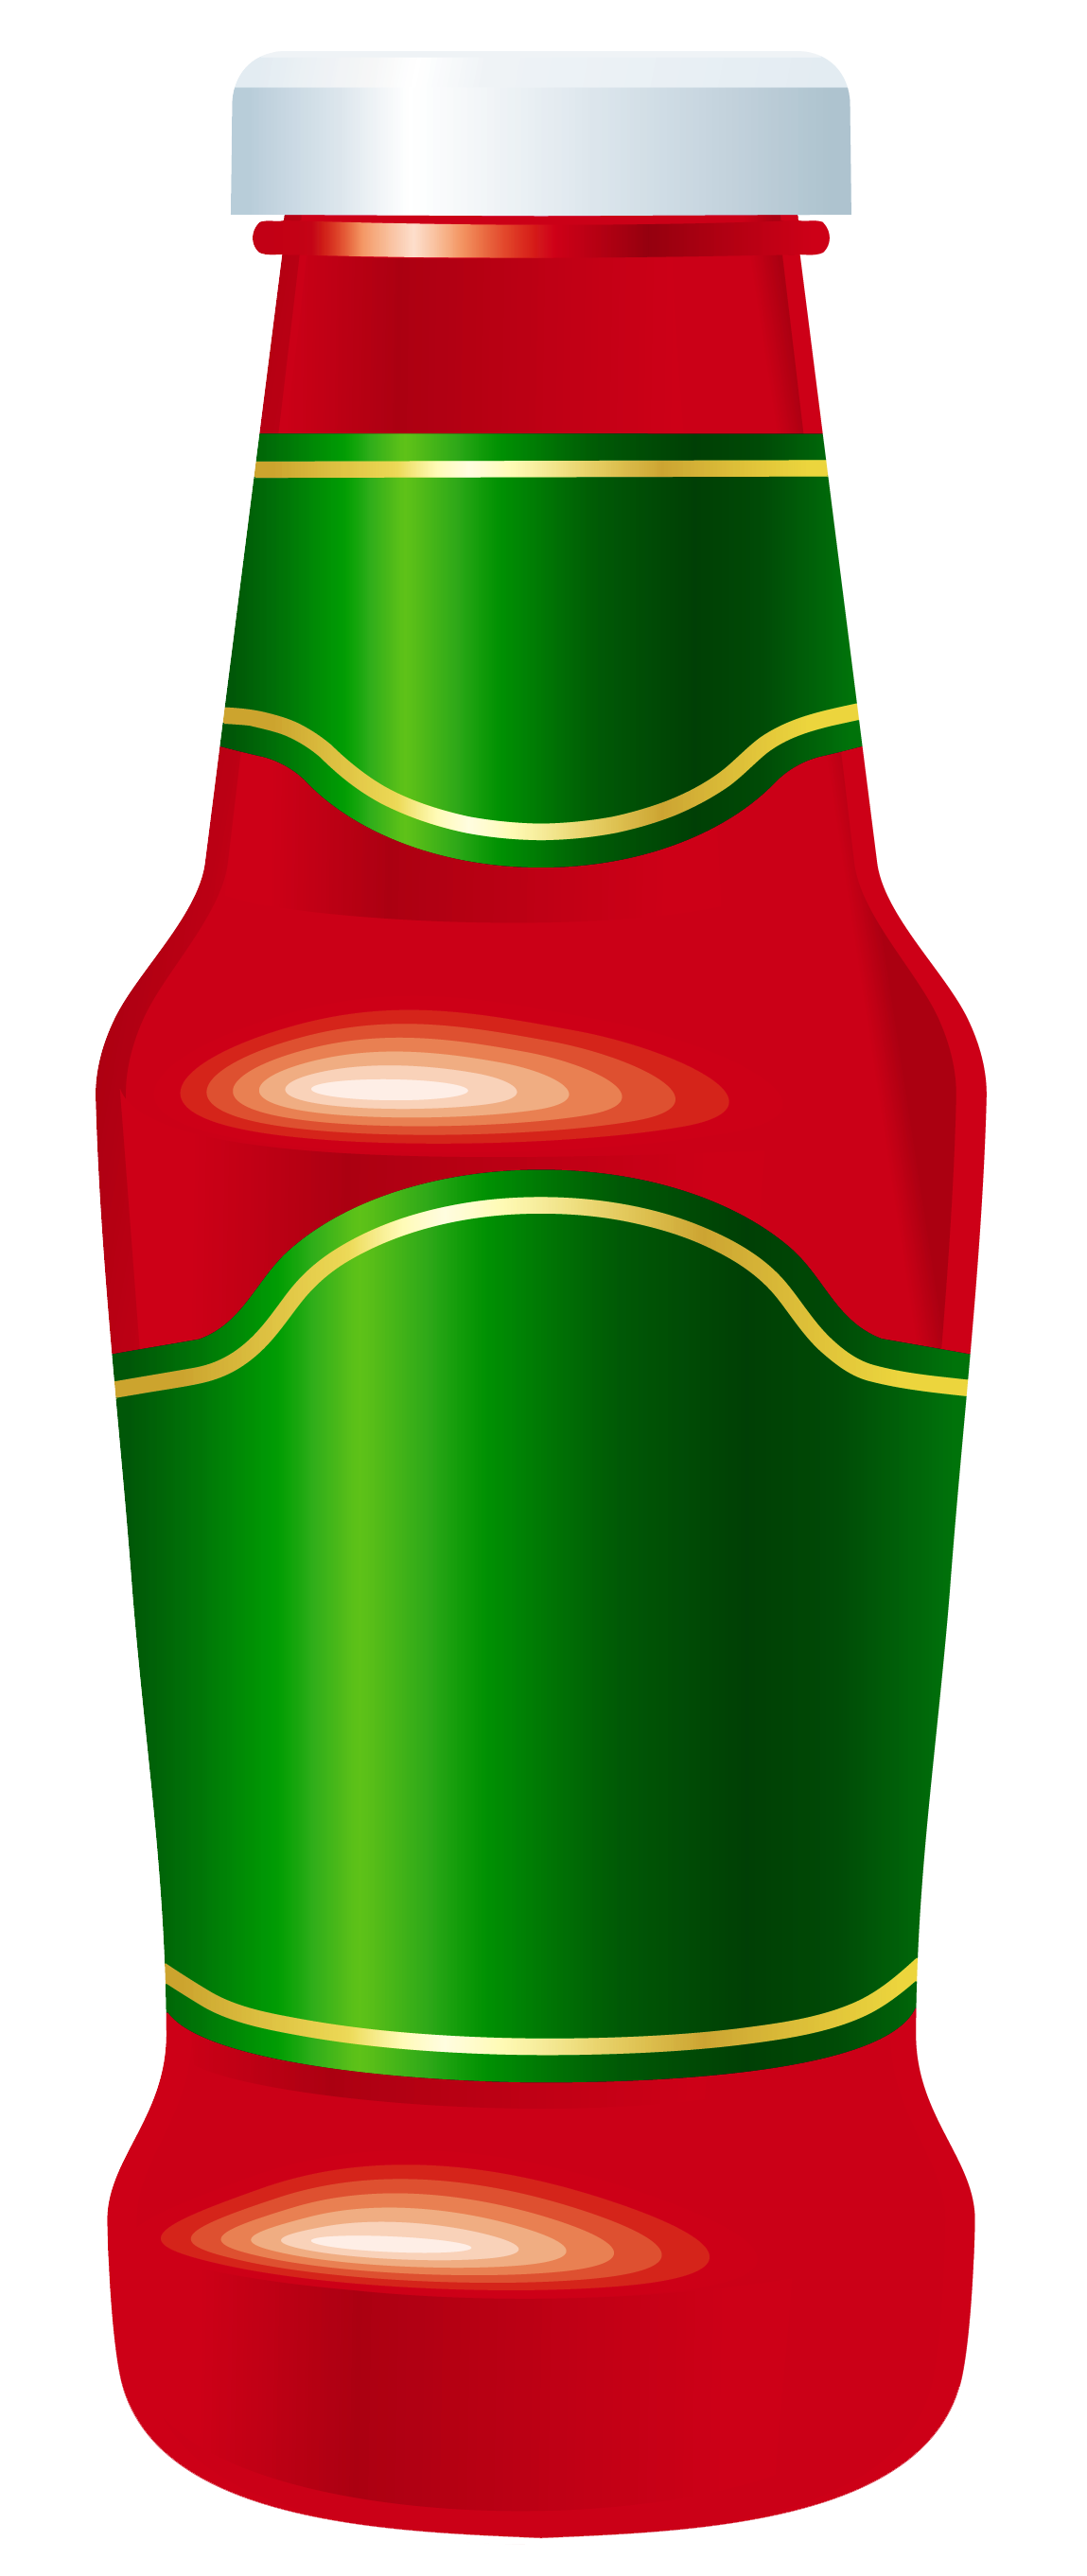 Ketchup bottle clipart image gallery yopriceville high png